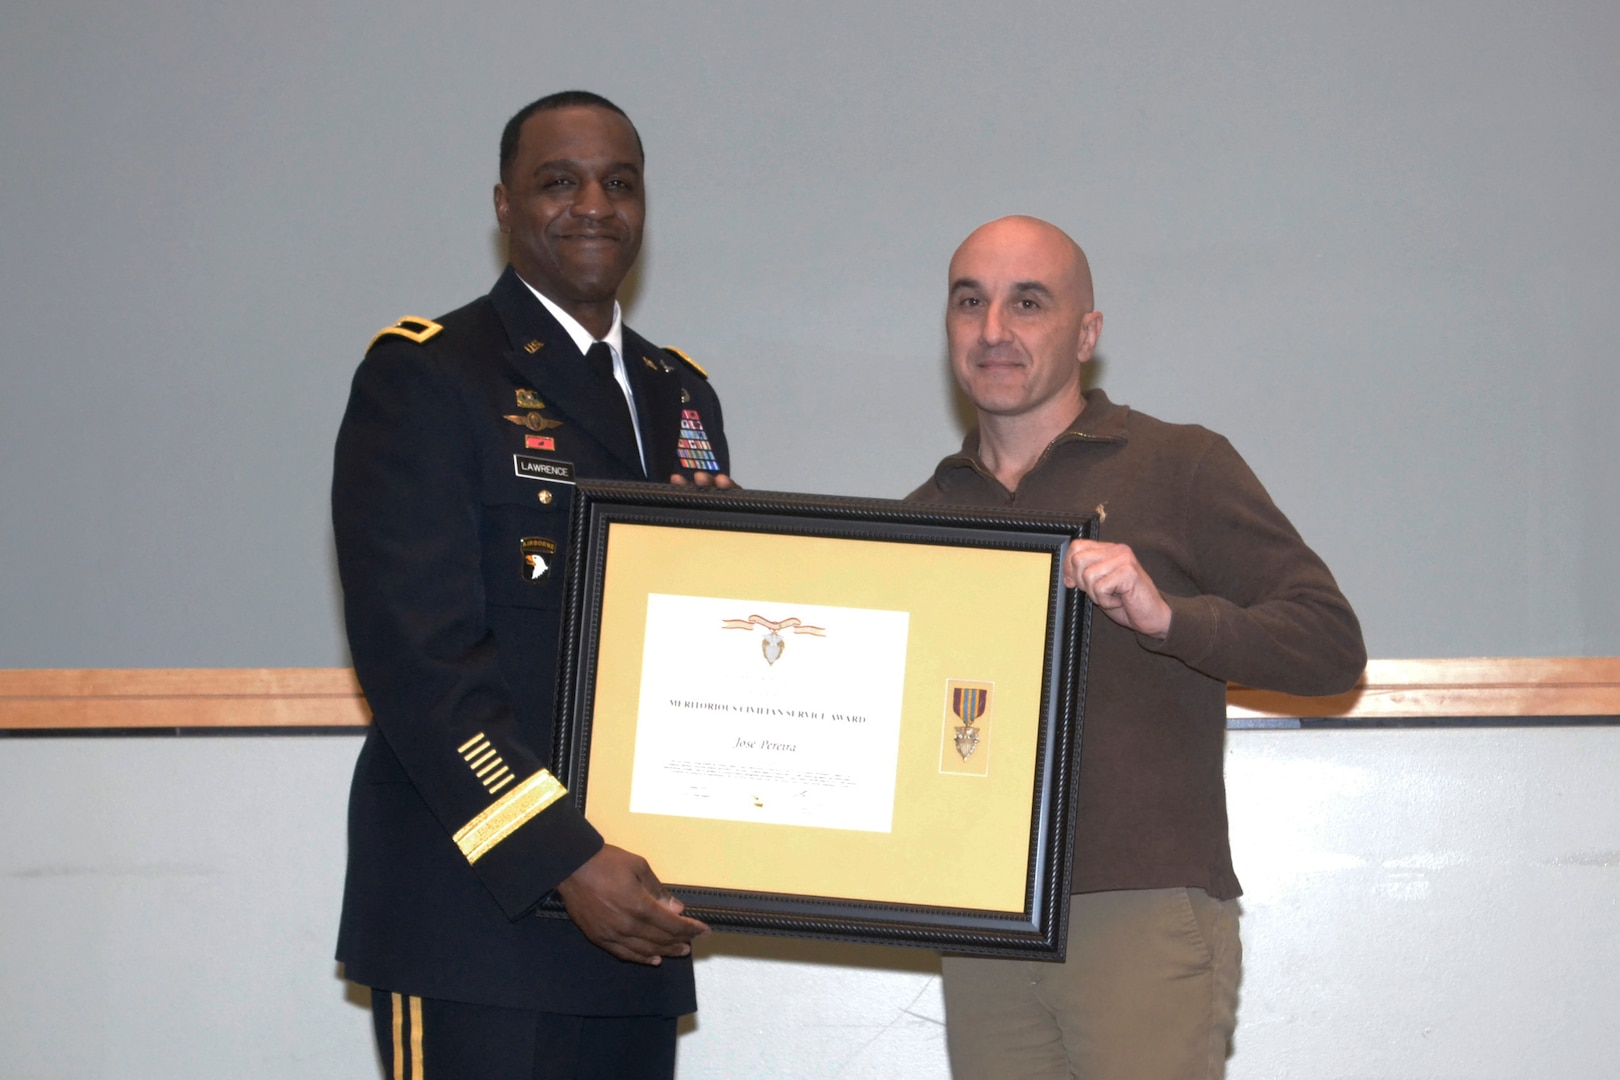 Jose Periera, DLA Troop Support Industrial Hardware Technical Quality division chief, receives the Civilian Meritorious Service award from DLA Troop Support Cmmander Army Brig. Gen. Gavin Lawrence Jan. 21, 2020 at DLA Troop Support in Philadelphia.   Periera was one of three IH employees who received the award for their work managing and assisting with the acquisition of roughly 940,000 items for more than 11,000 customers.